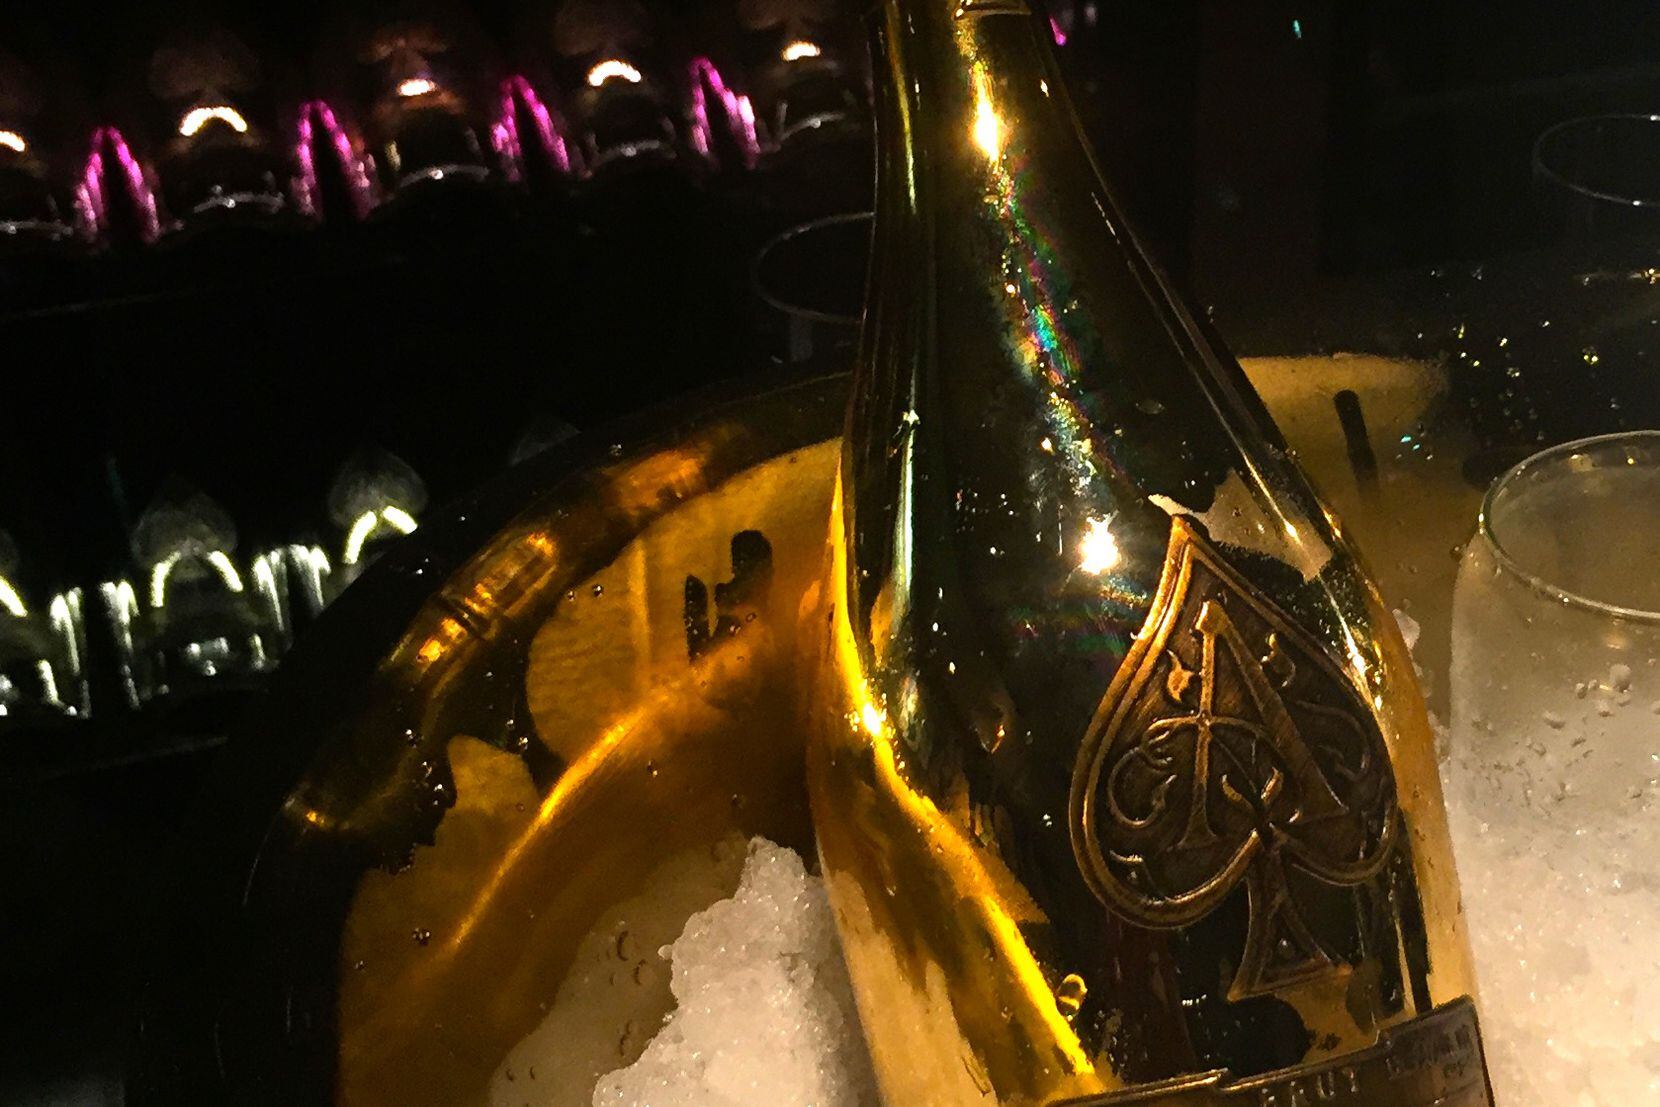 Only in Dallas? Nick & Sam's sells $150 glass of Champagne